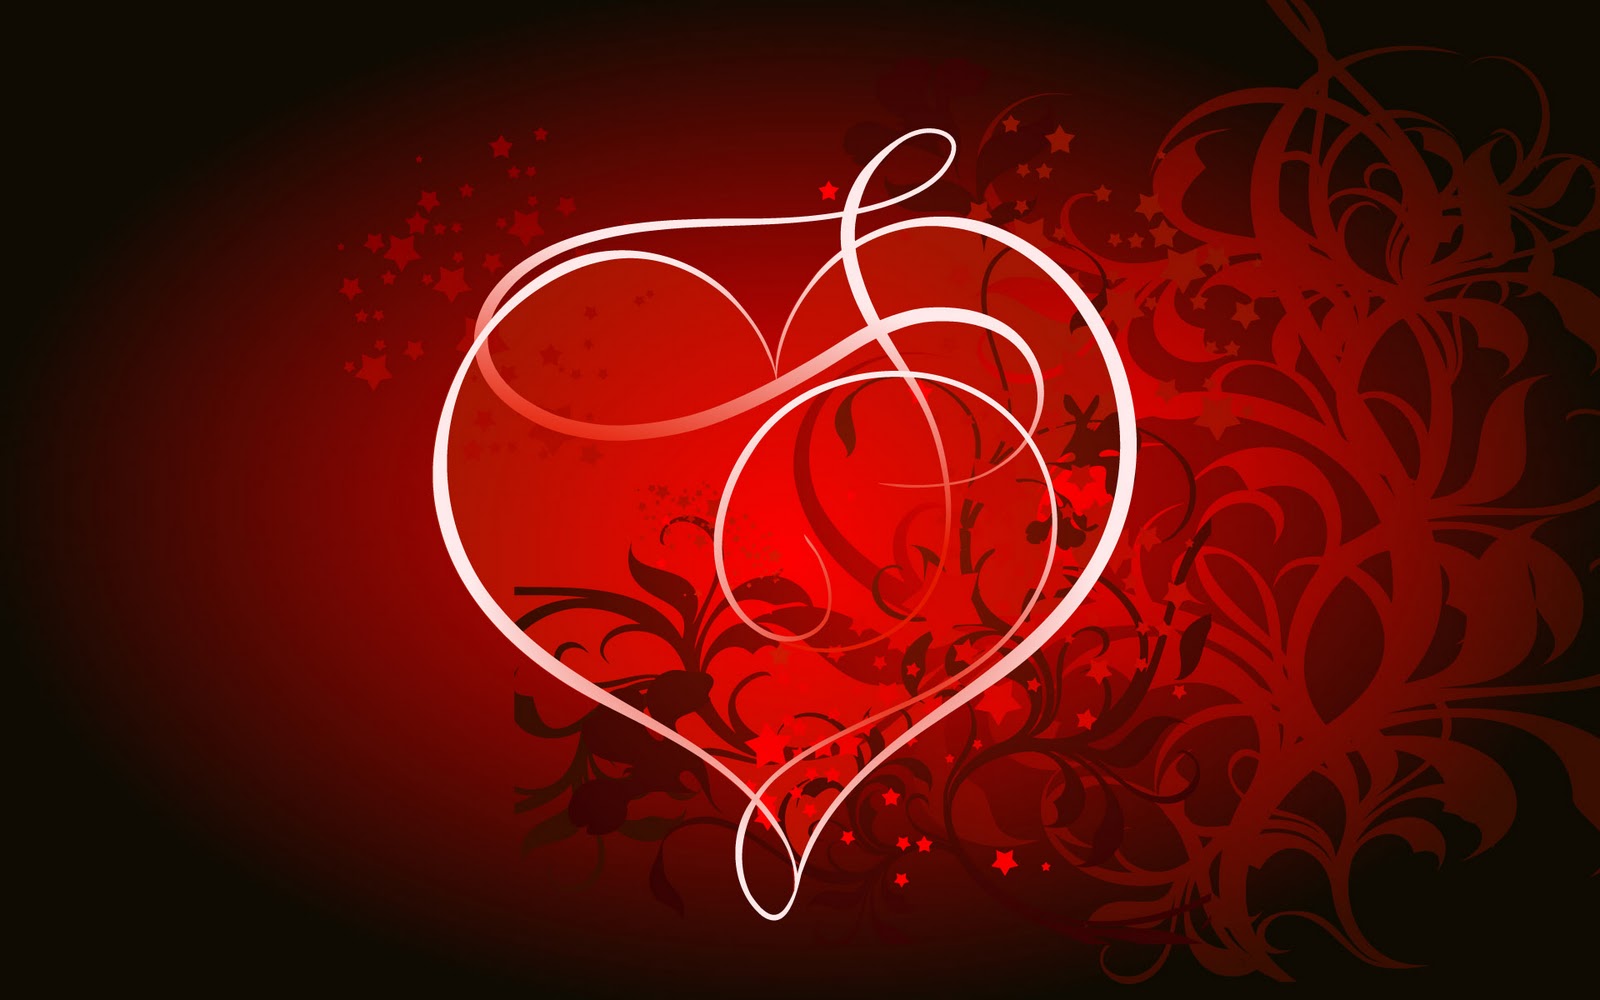  Card E Cards 2013 Top 10 Valentines Day Desktop Wallpapers for 1600x1000